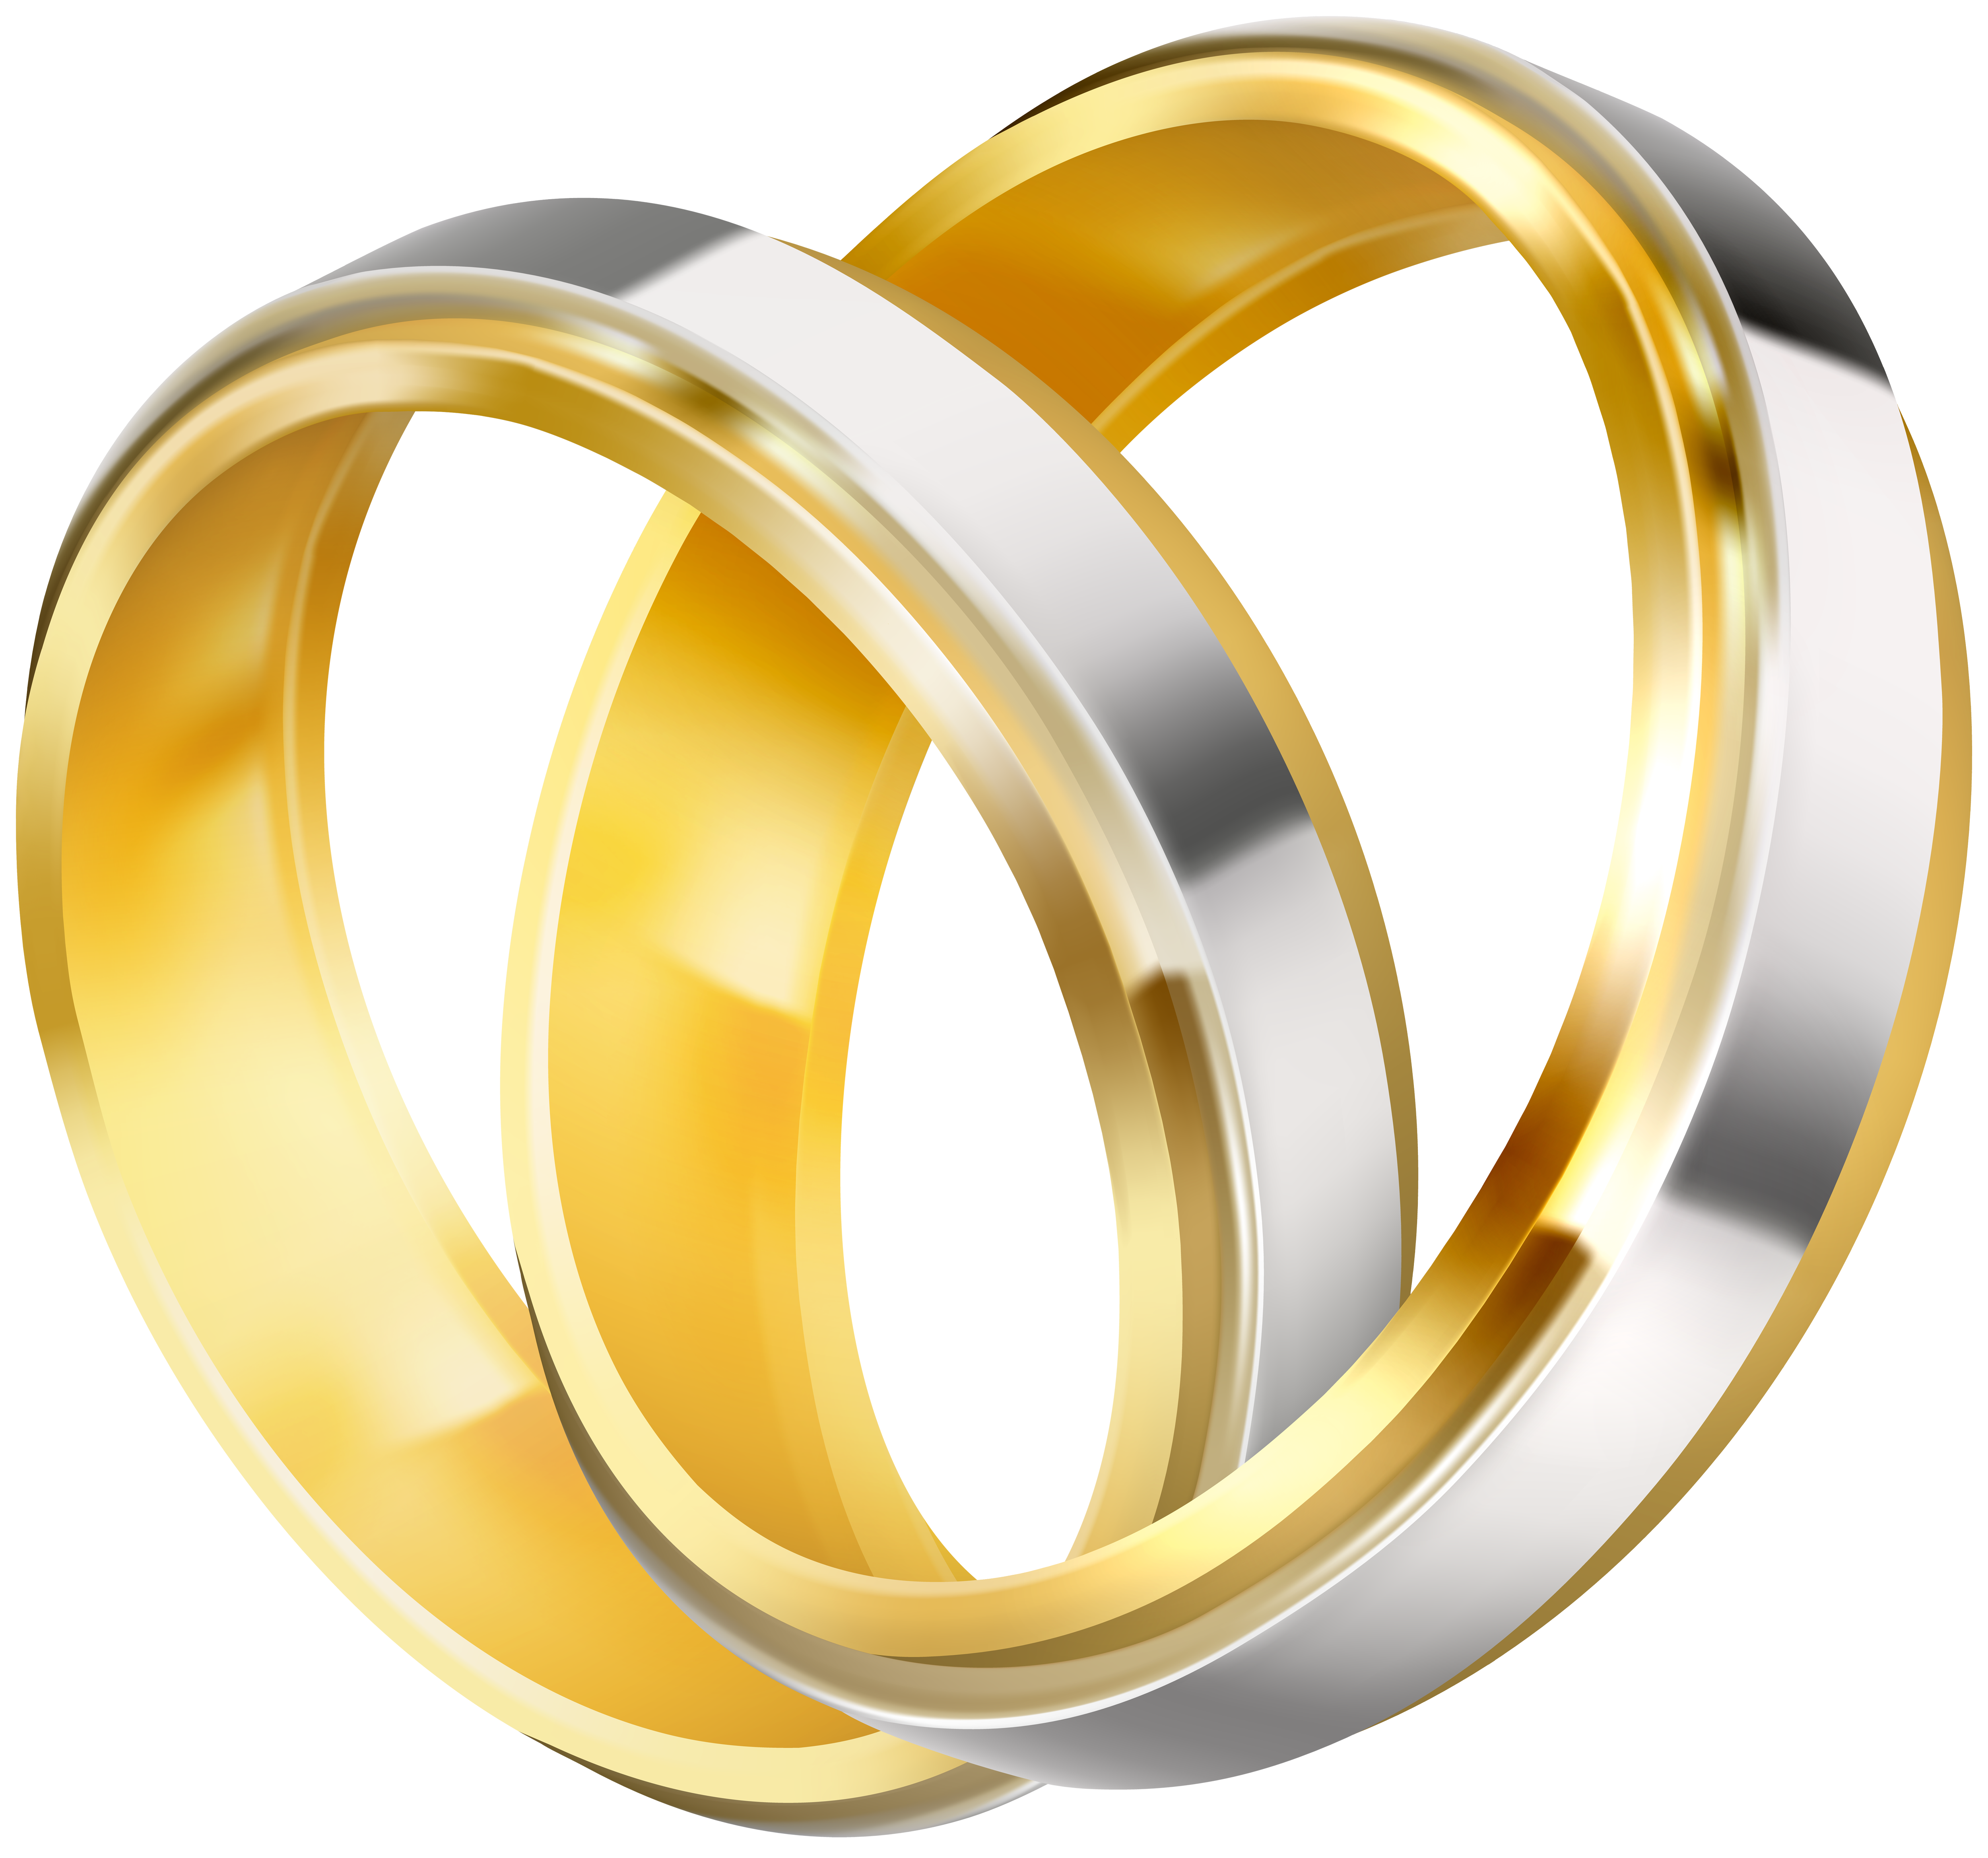 wedding rings clipart image gallery yopriceville high quality images and transparent png free clipart gallery yopriceville